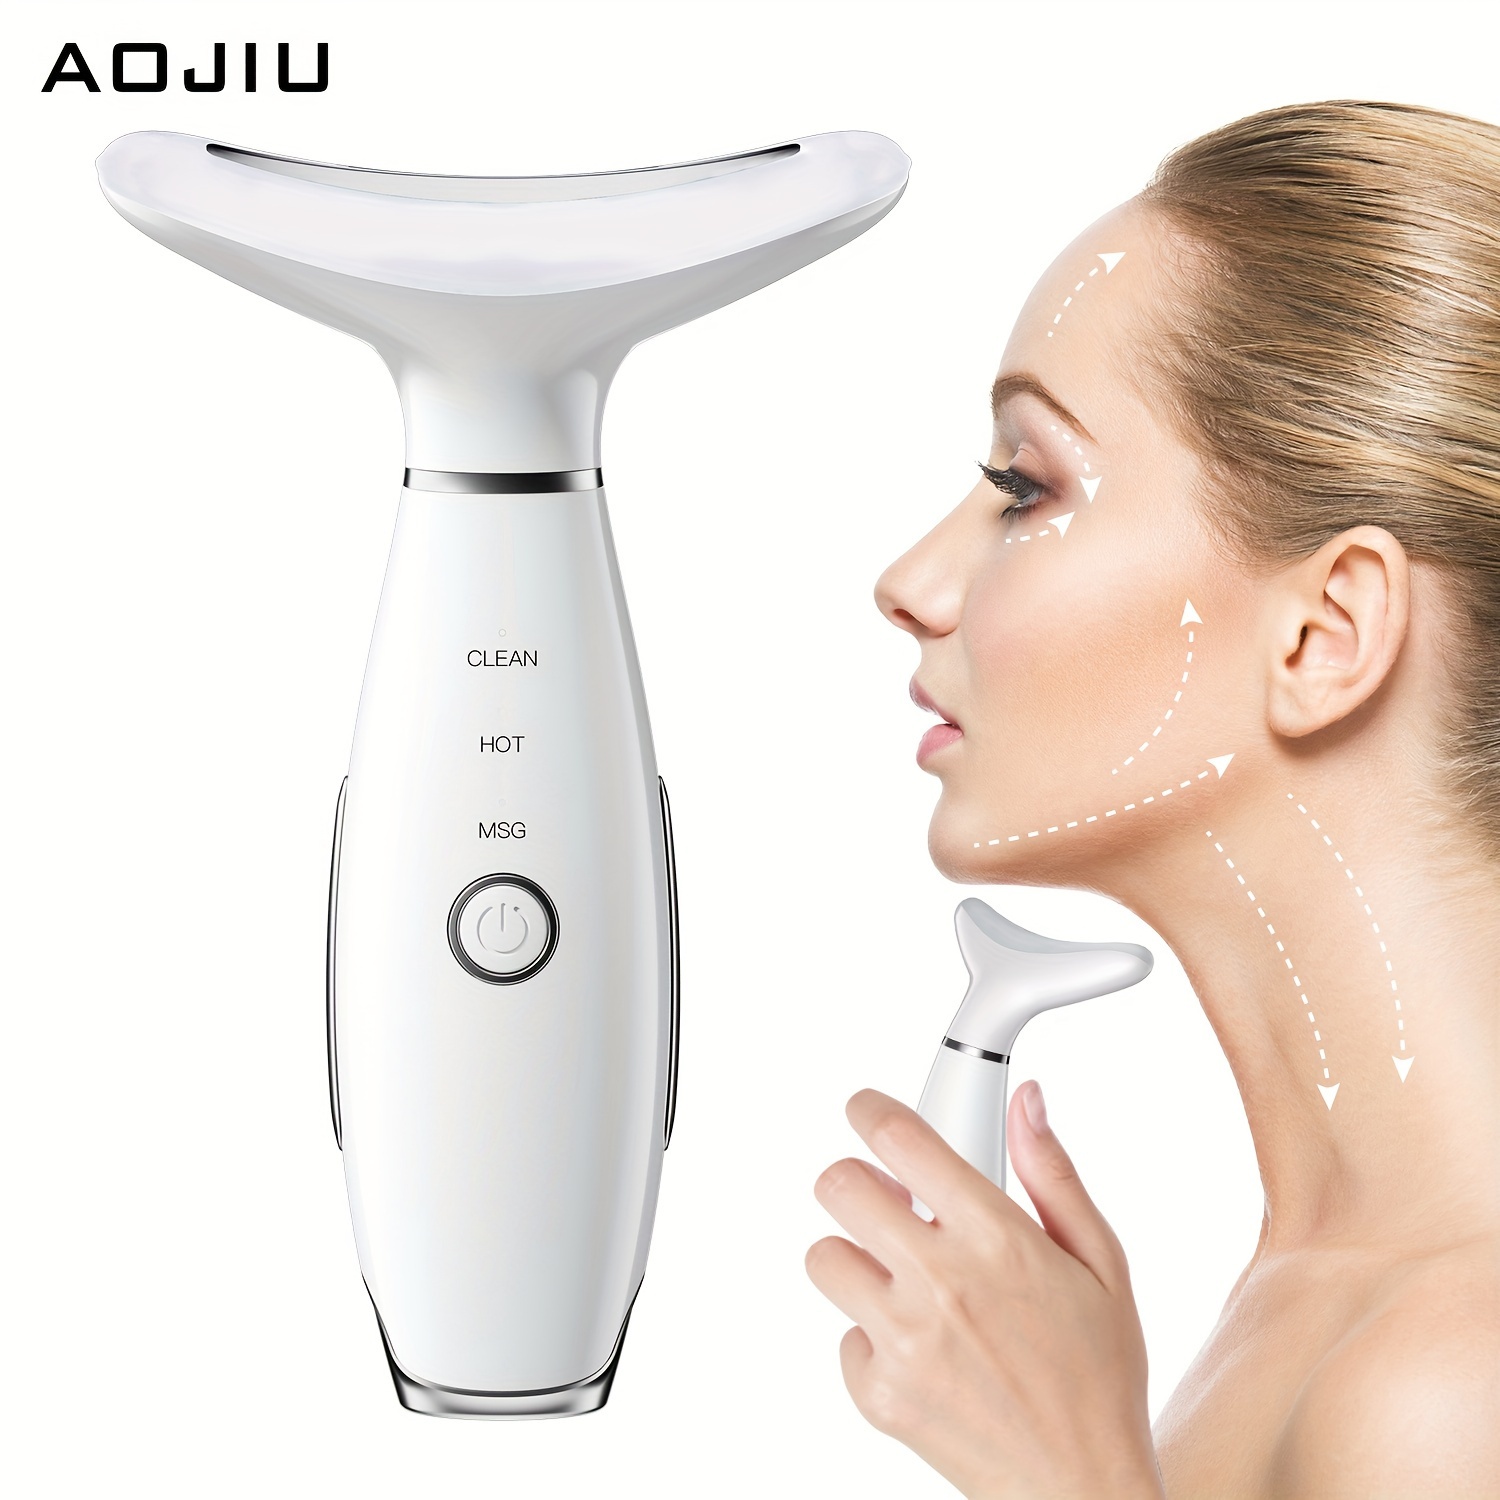 

Home Spa Skin Care, Neck Facial Beauty Instrument, Facial Skin Care Massager, 3-in-1 Portable Electric Face Massager, 3-color Led, Vibration, Heat